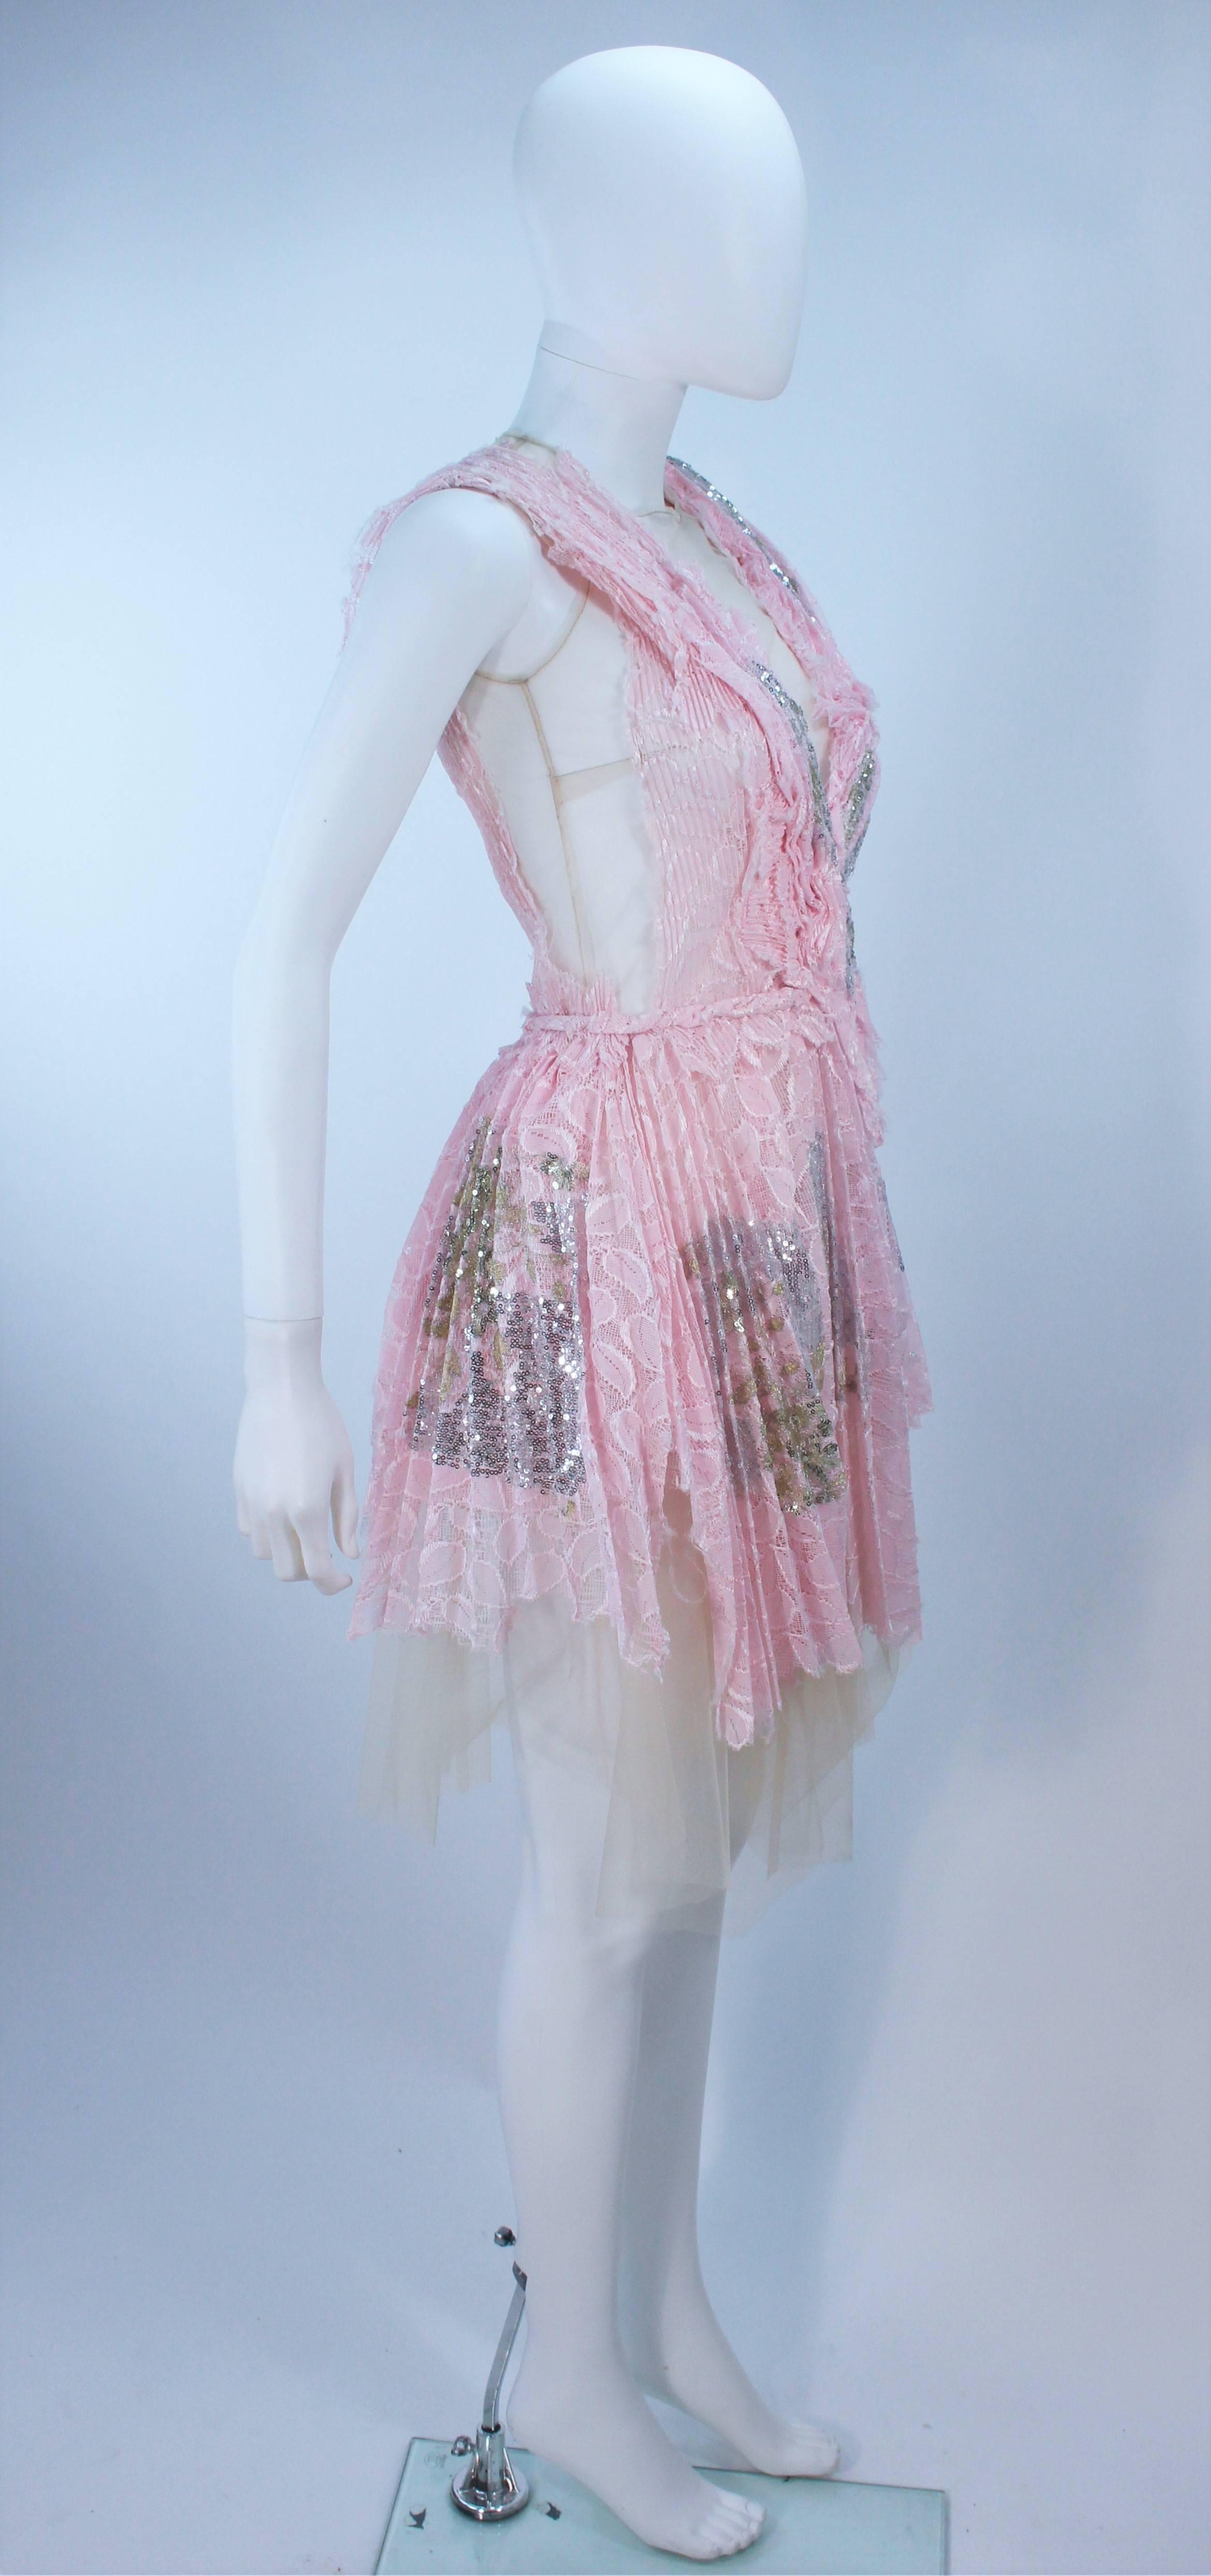 MORALES Sheer Pink Applique Cocktail Dress with Sequins Size 2 For Sale 2